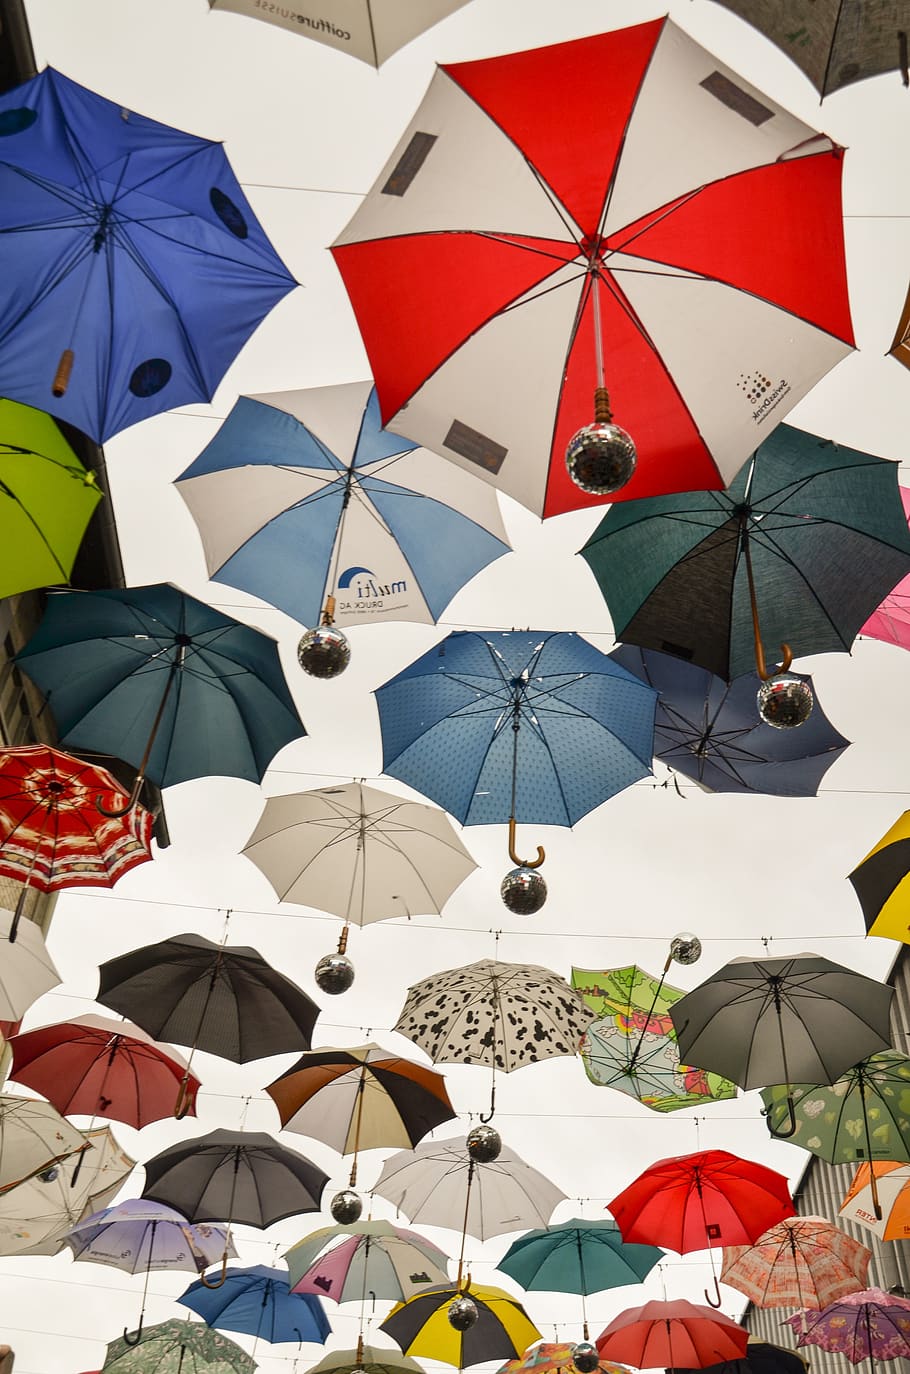 umbrella, parasol, rainy weather, april weather, screens, art, colorful, roof, shade tree, color